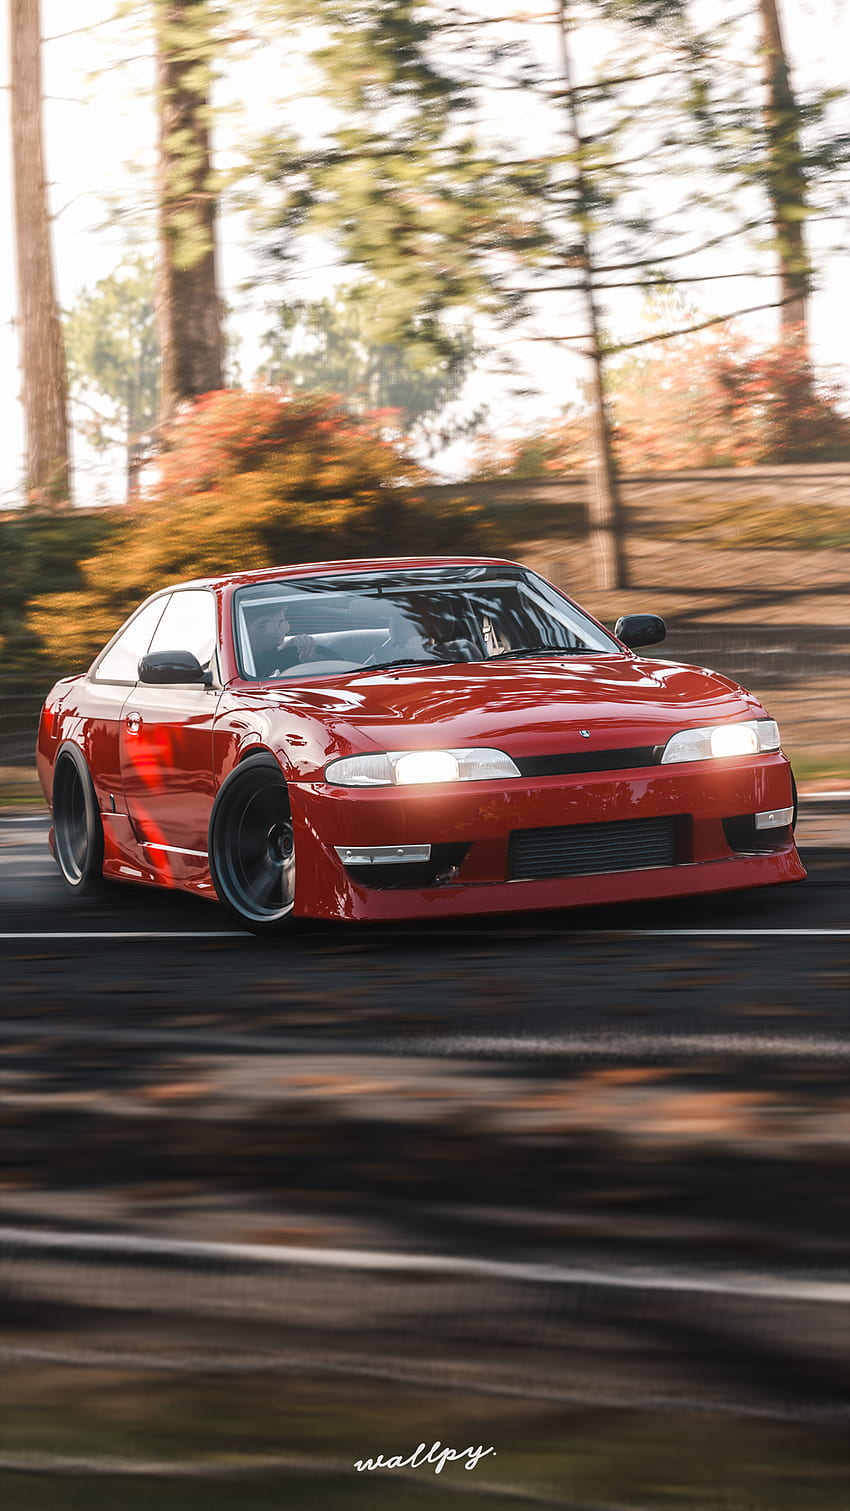 drifting car 1080P 2k 4k Full HD Wallpapers Backgrounds Free Download   Wallpaper Crafter